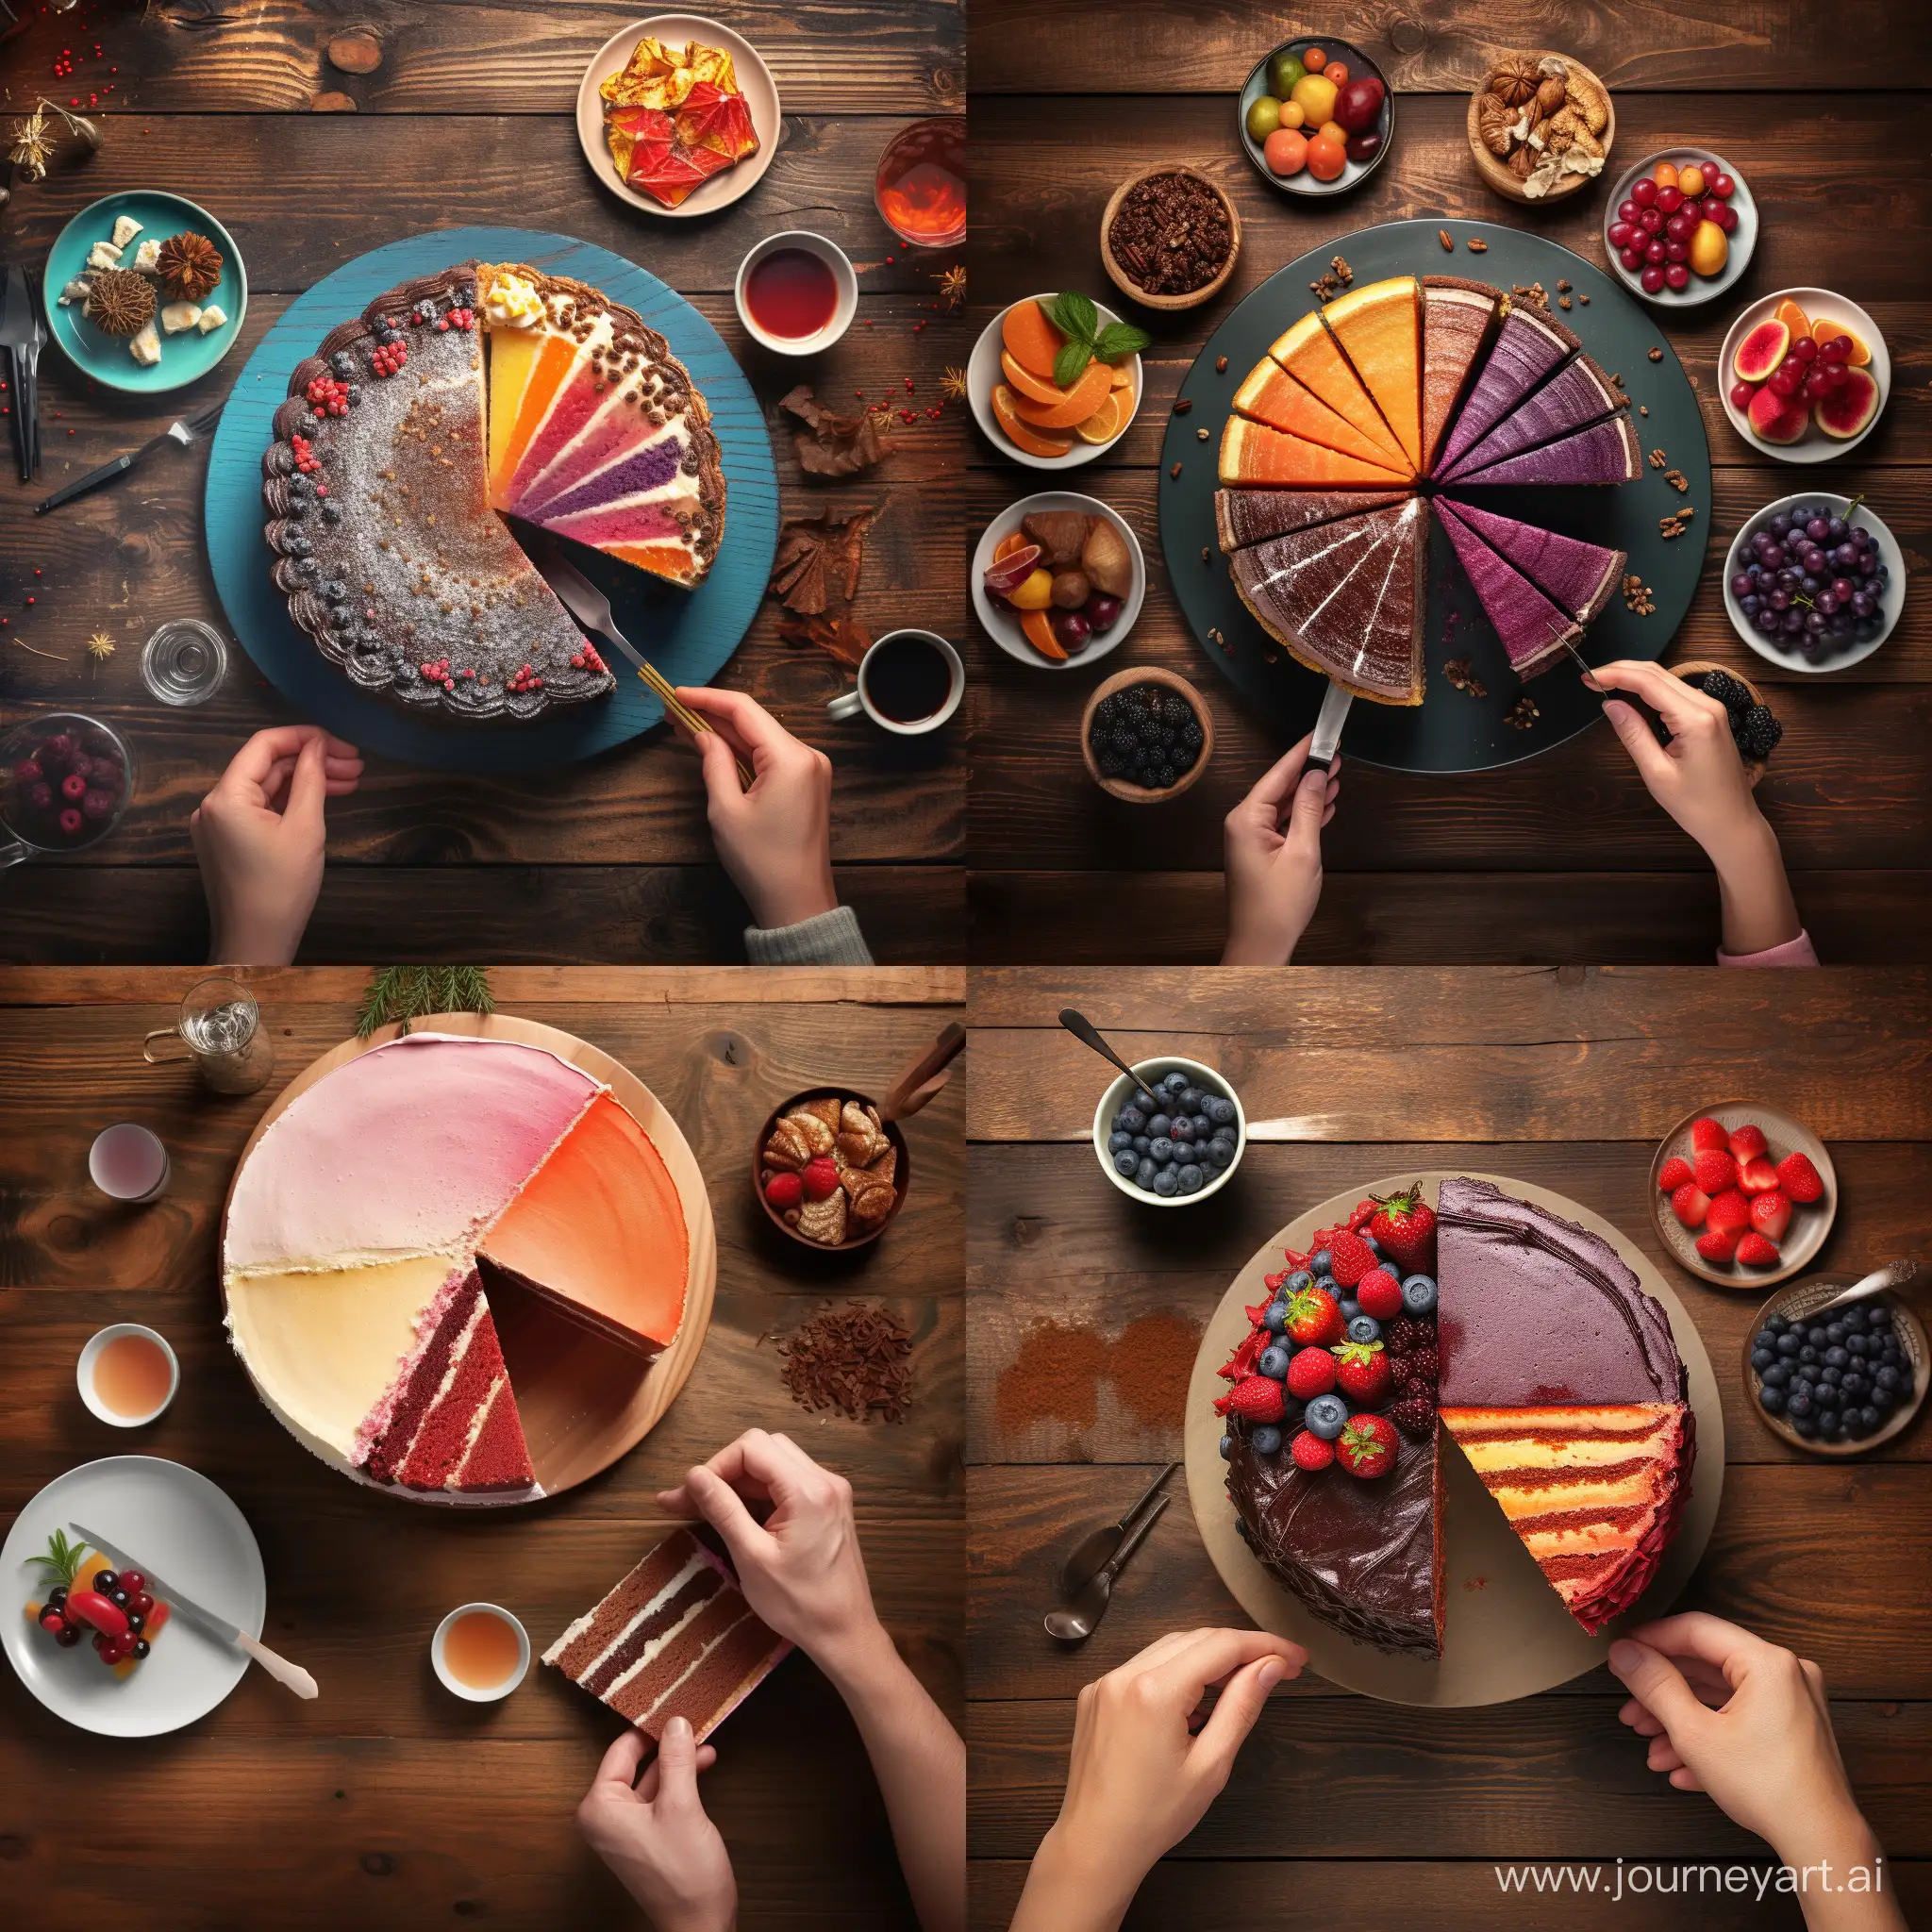 color photo of a cake on a wooden table, with a slice of cake cut out and placed next to it. The hands of a chef are visible. The view is from above. The overall atmosphere is festive. The image size is 1360x644. The color palette to be used includes 